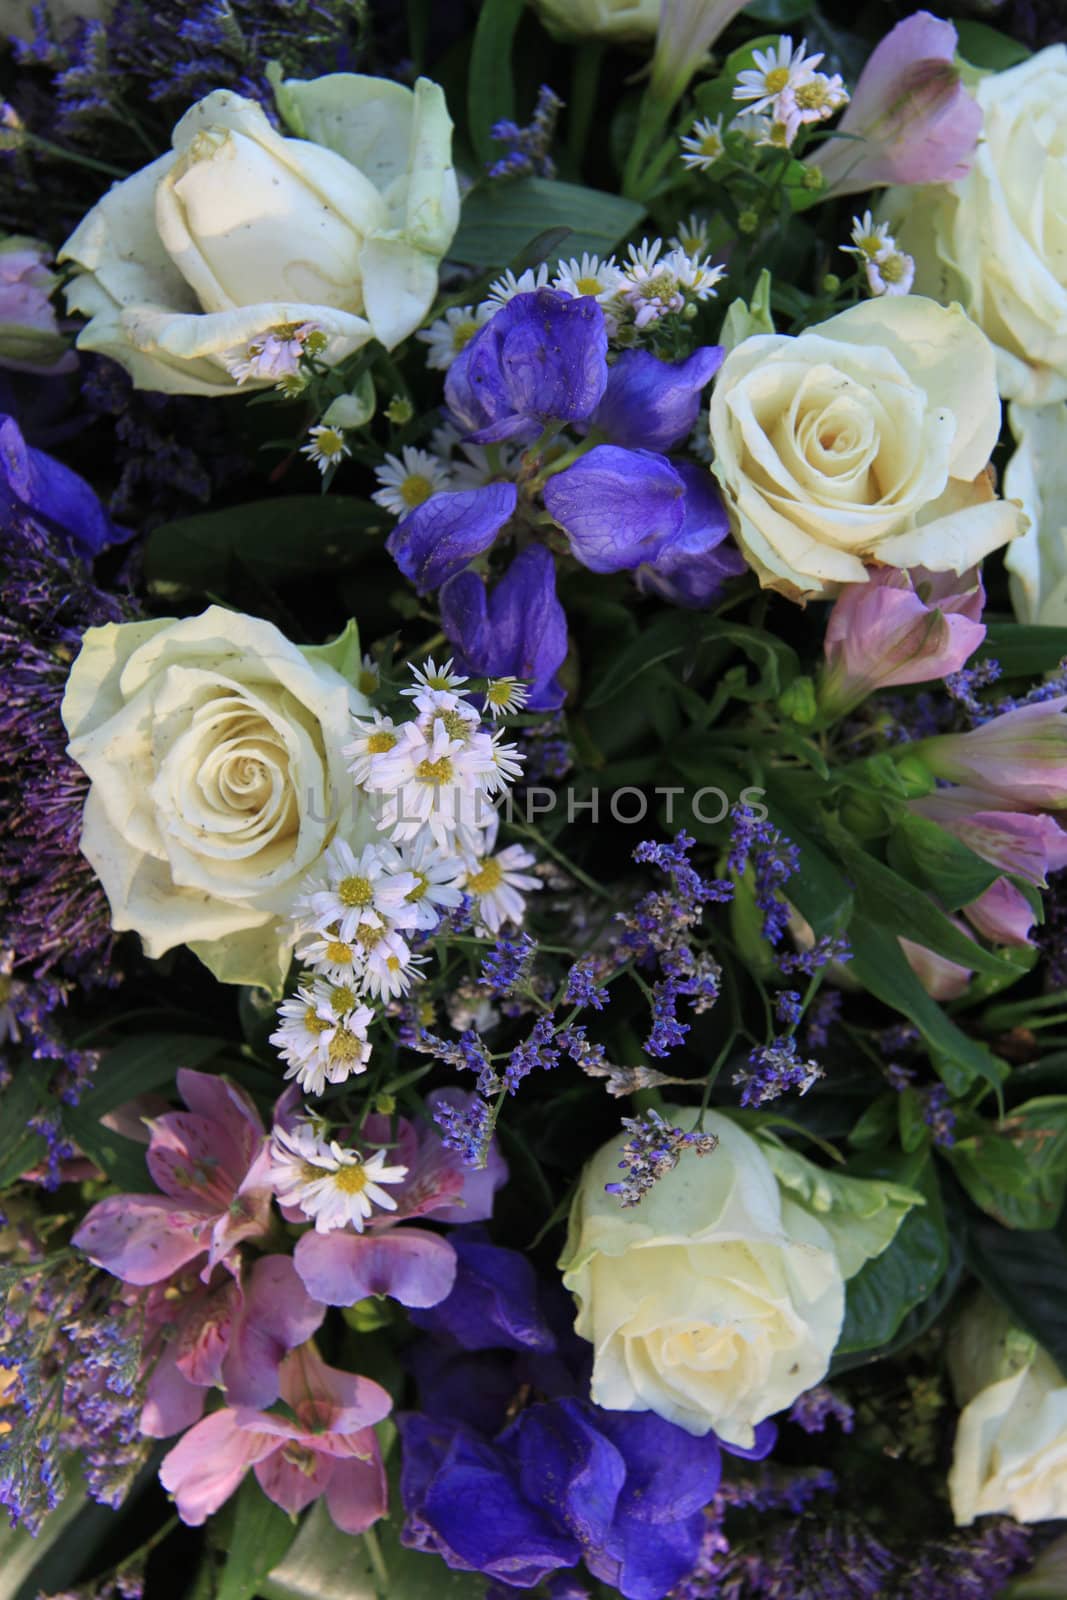 Blue and white flower arrangement with iiris and white roses